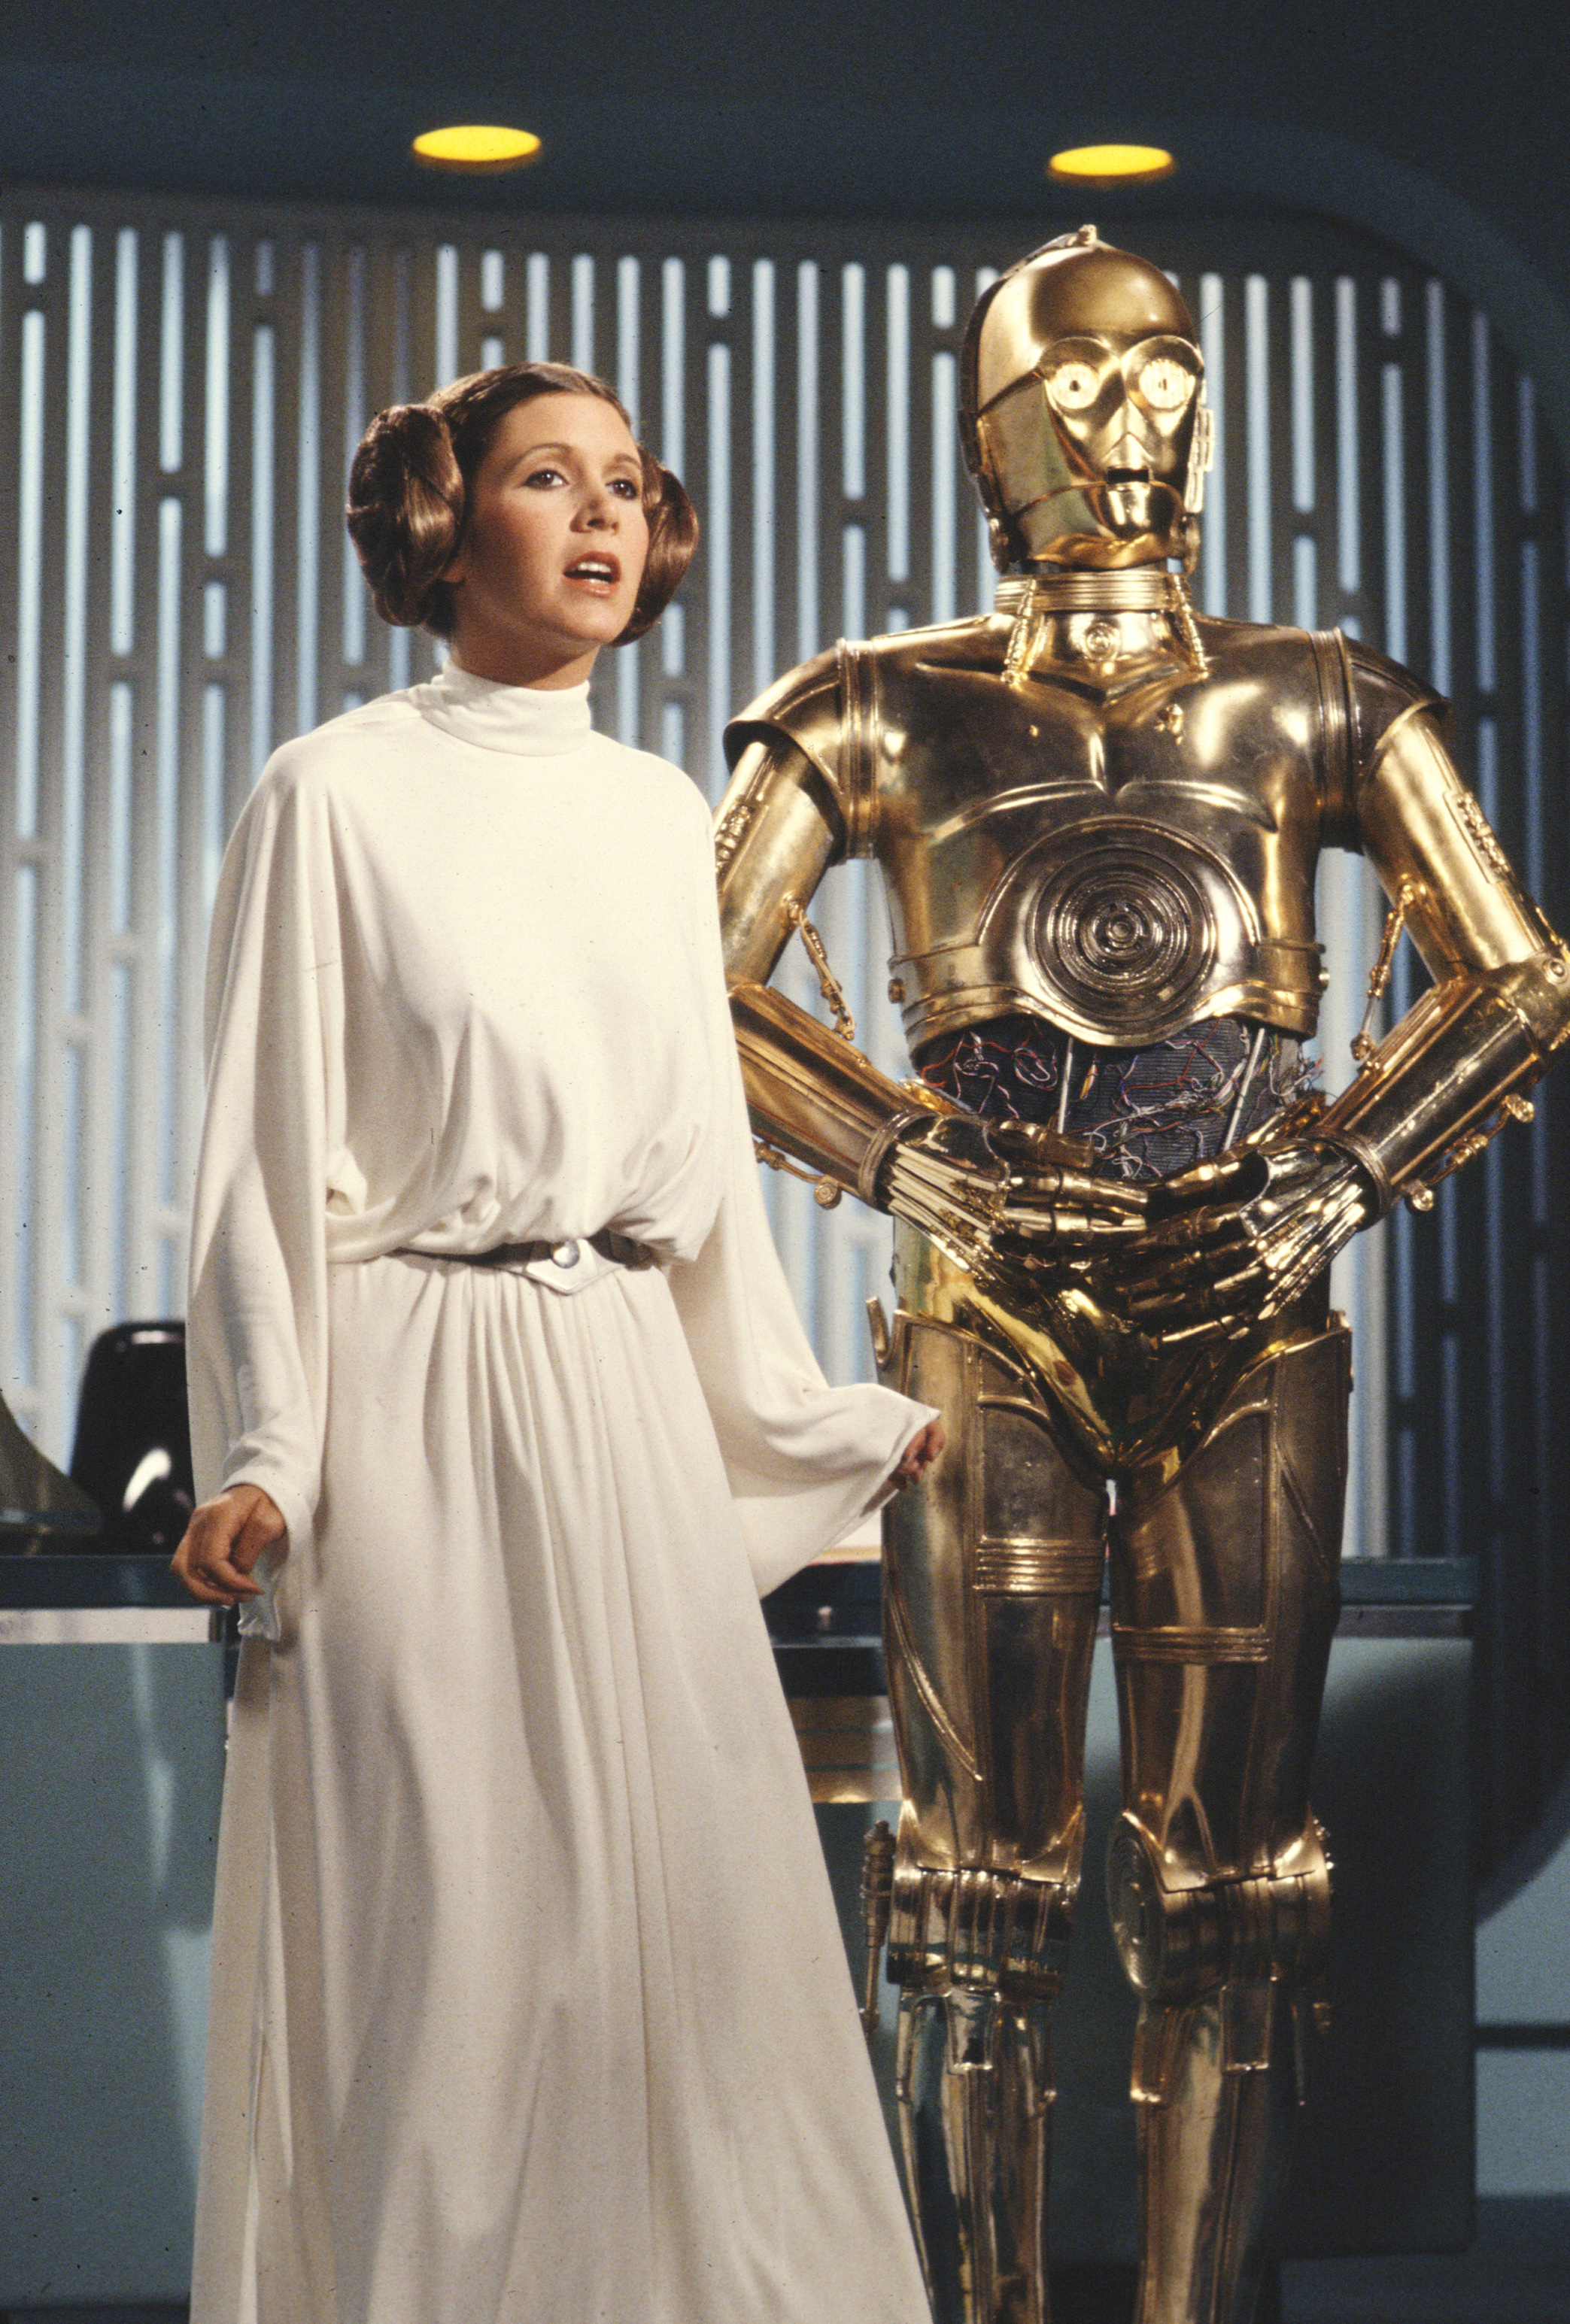 Carrie Fisher as Princess Leia Organa in "The Star Wars" on August 23, 1978 | Source: Getty Images